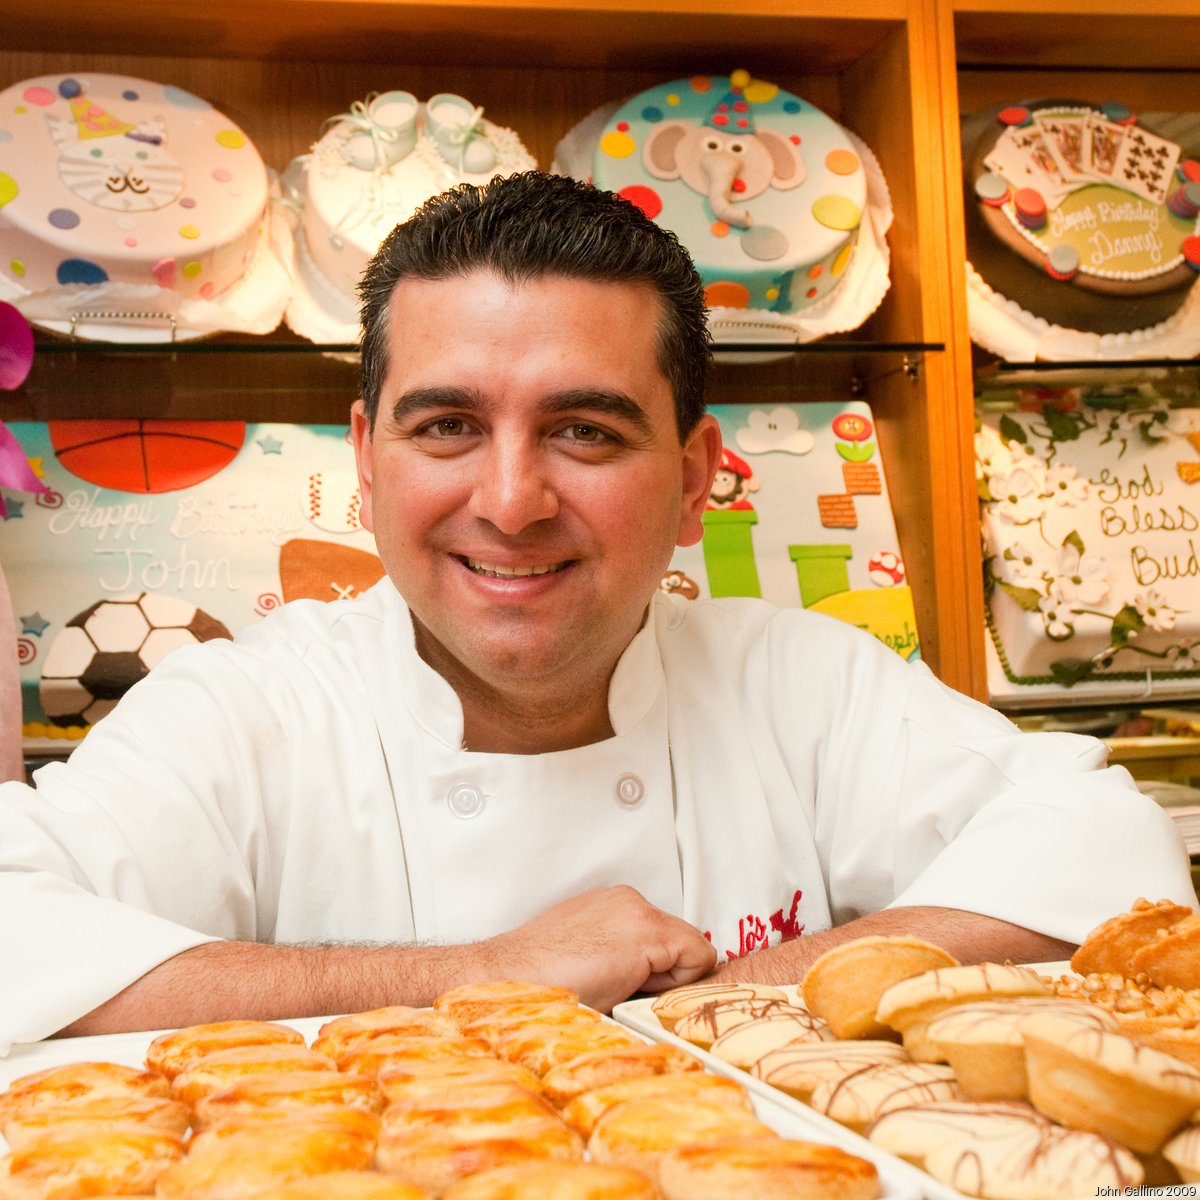 The Surprising Amount Of Money Buddy Valastro's Most Expensive Cake Cost